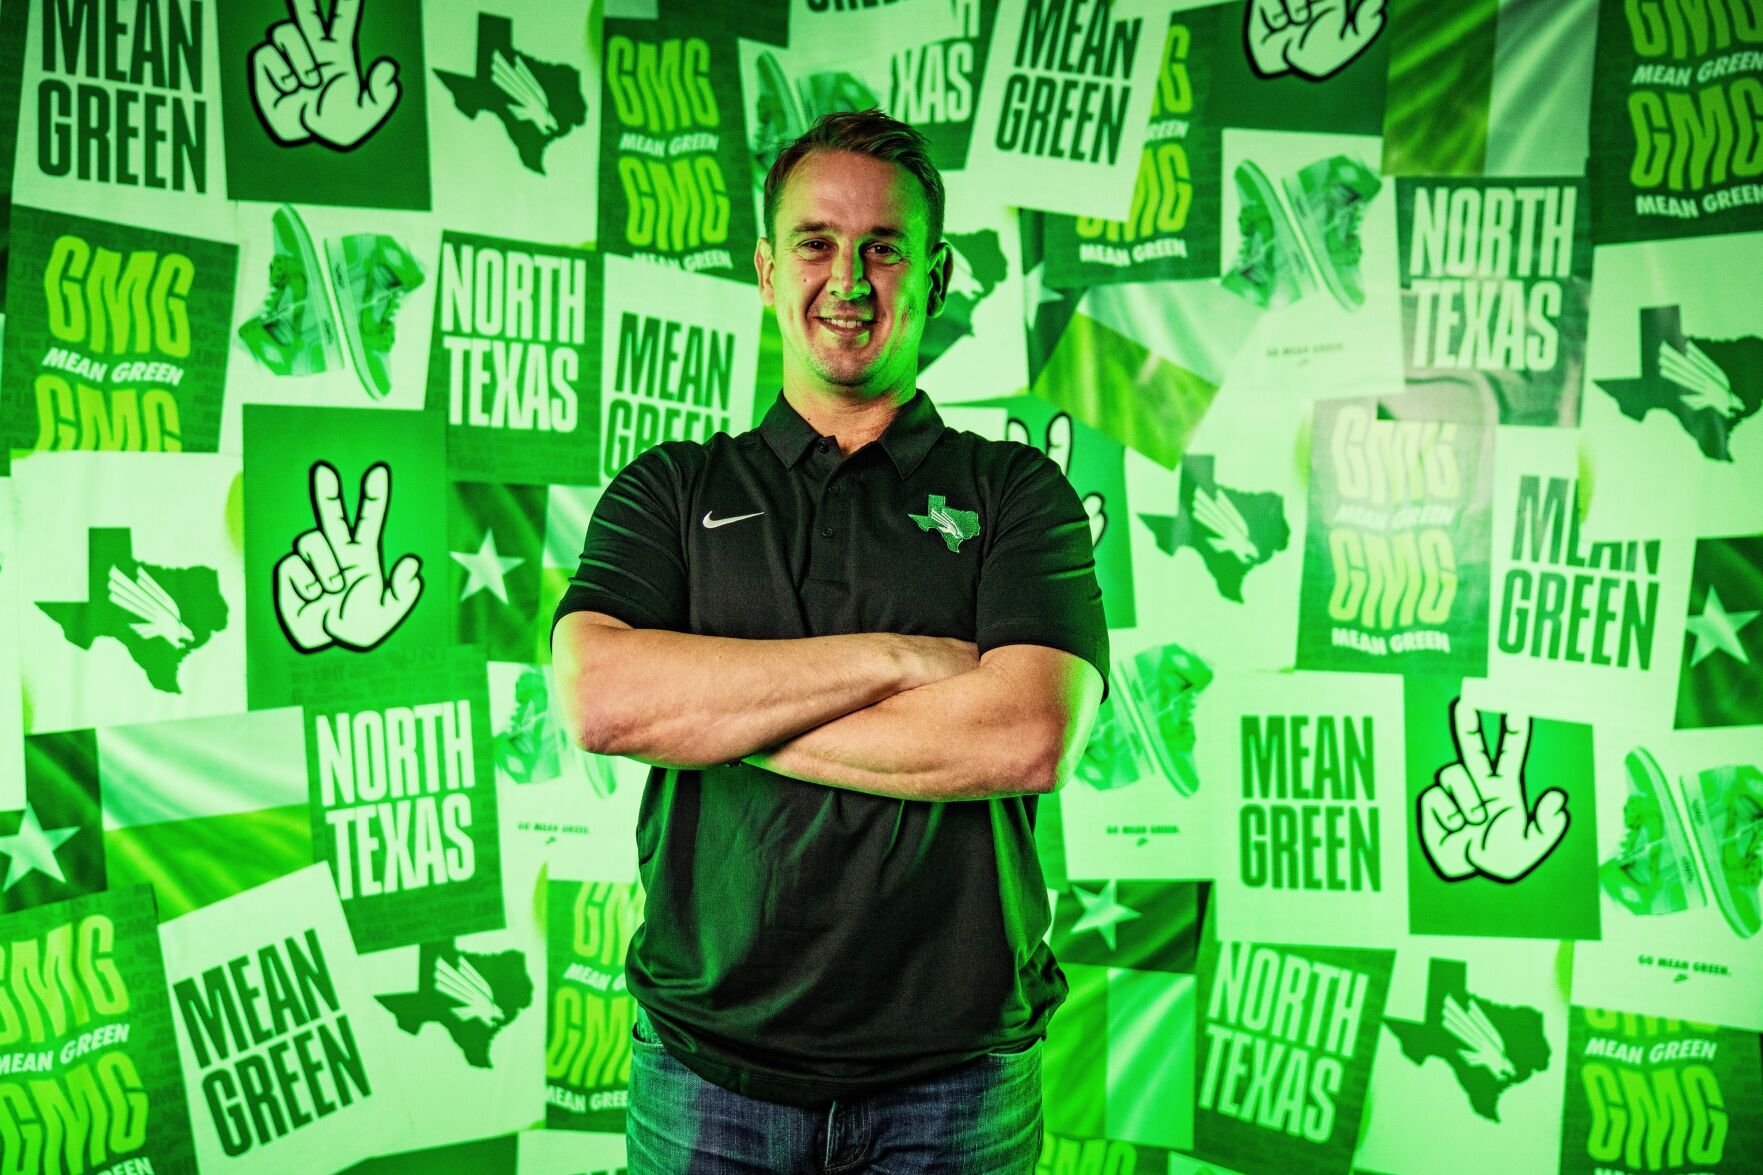 North Texas Mean Green basketball Hall of Famer jersey